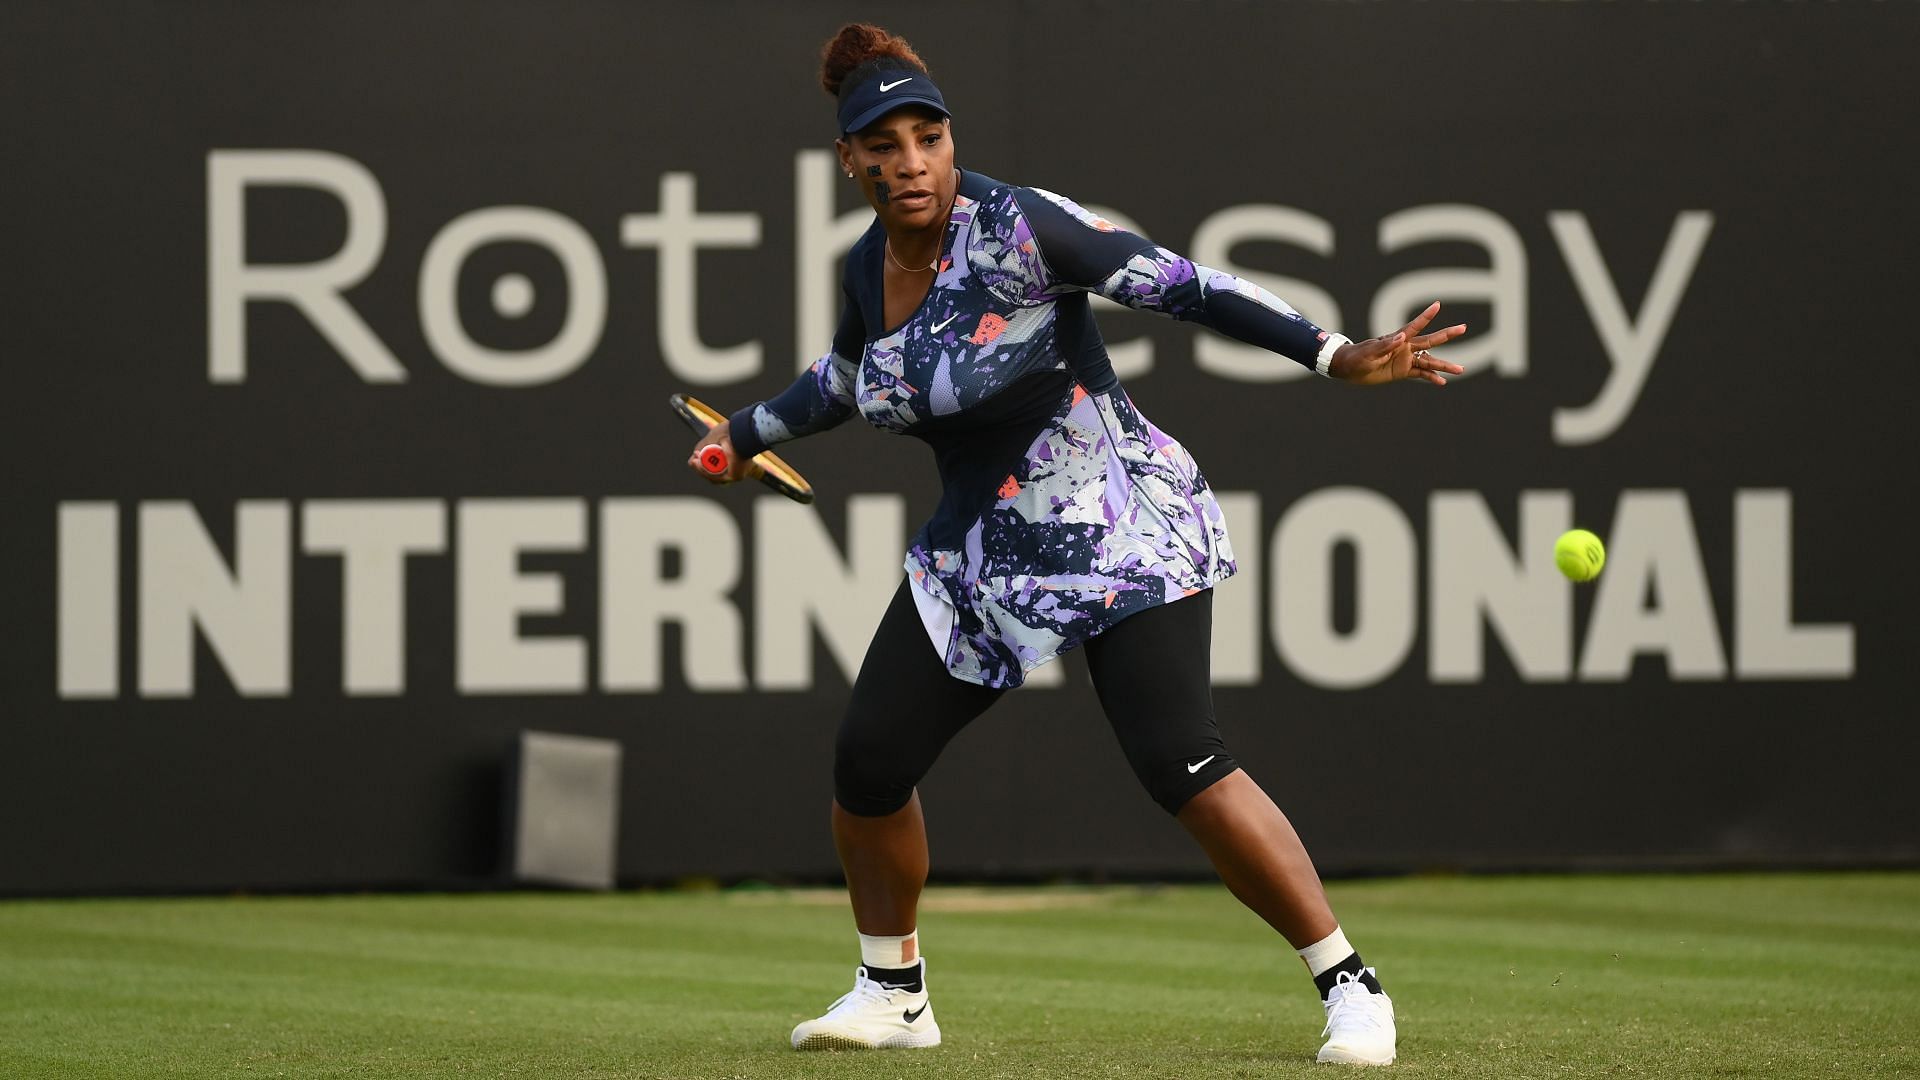 Serena Williams pictured at the Rothesay International Eastbourne.